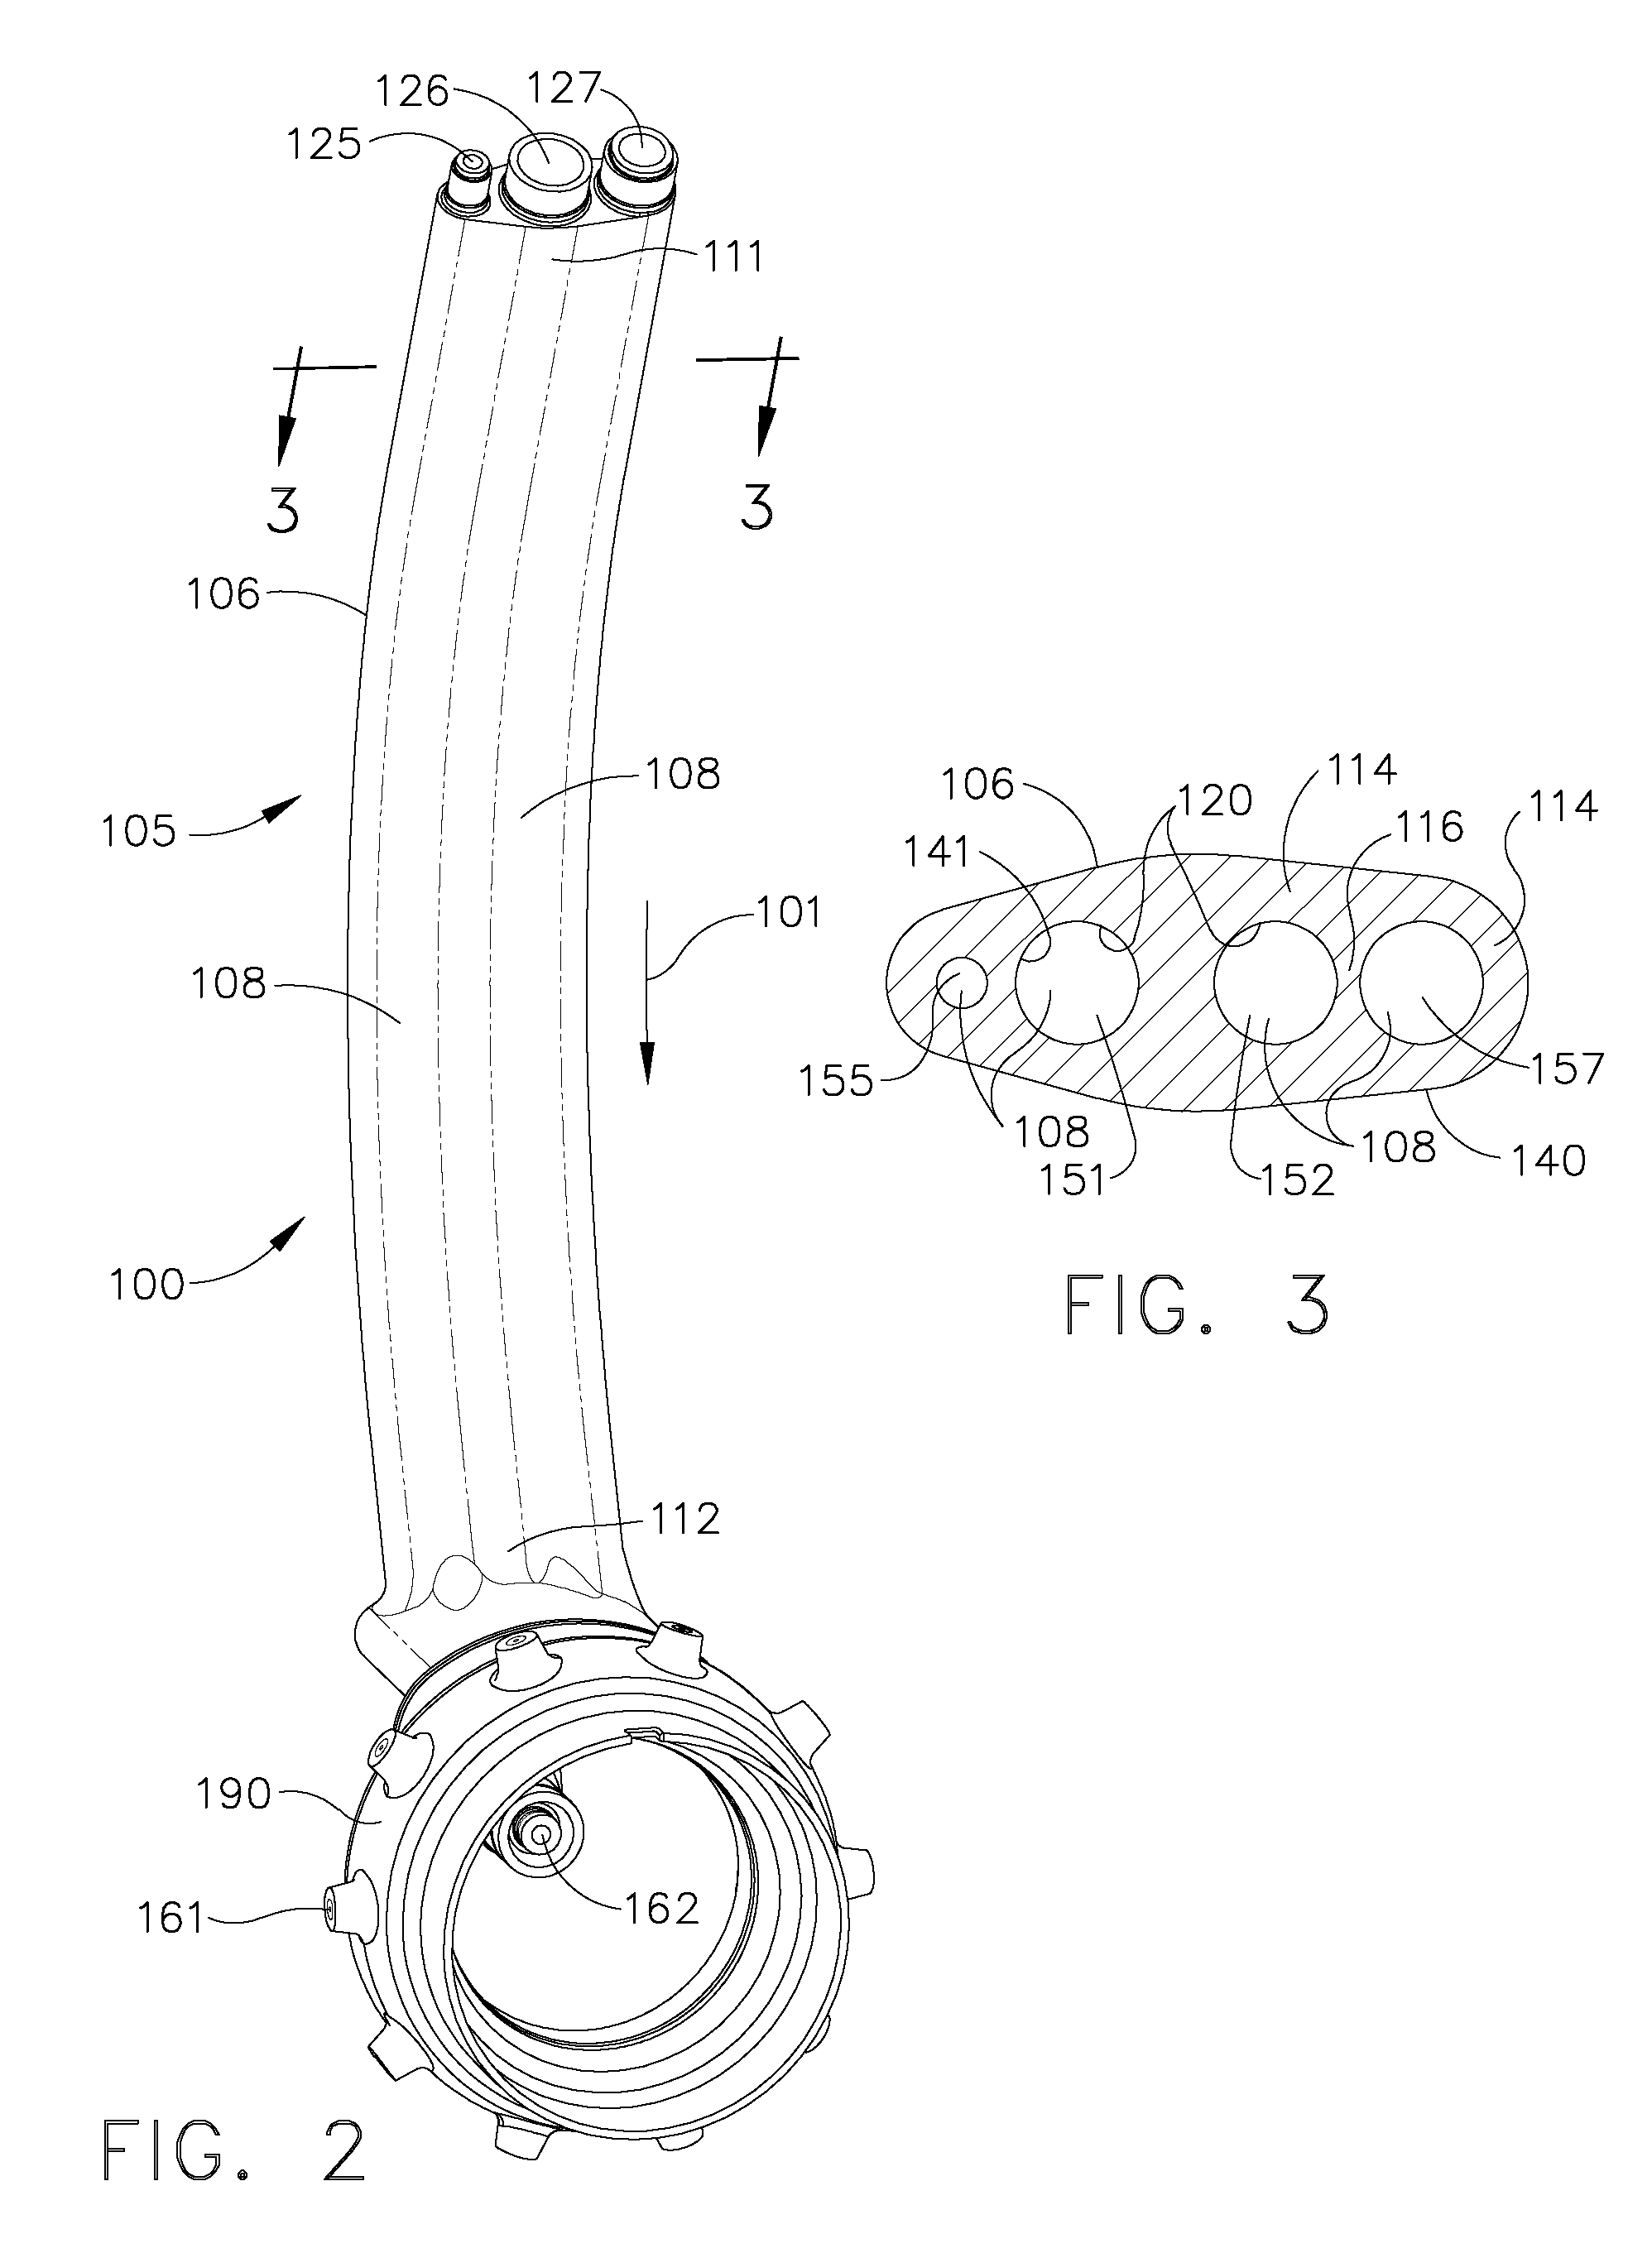 Method of manufacturing a unitary conduit for transporting fluids